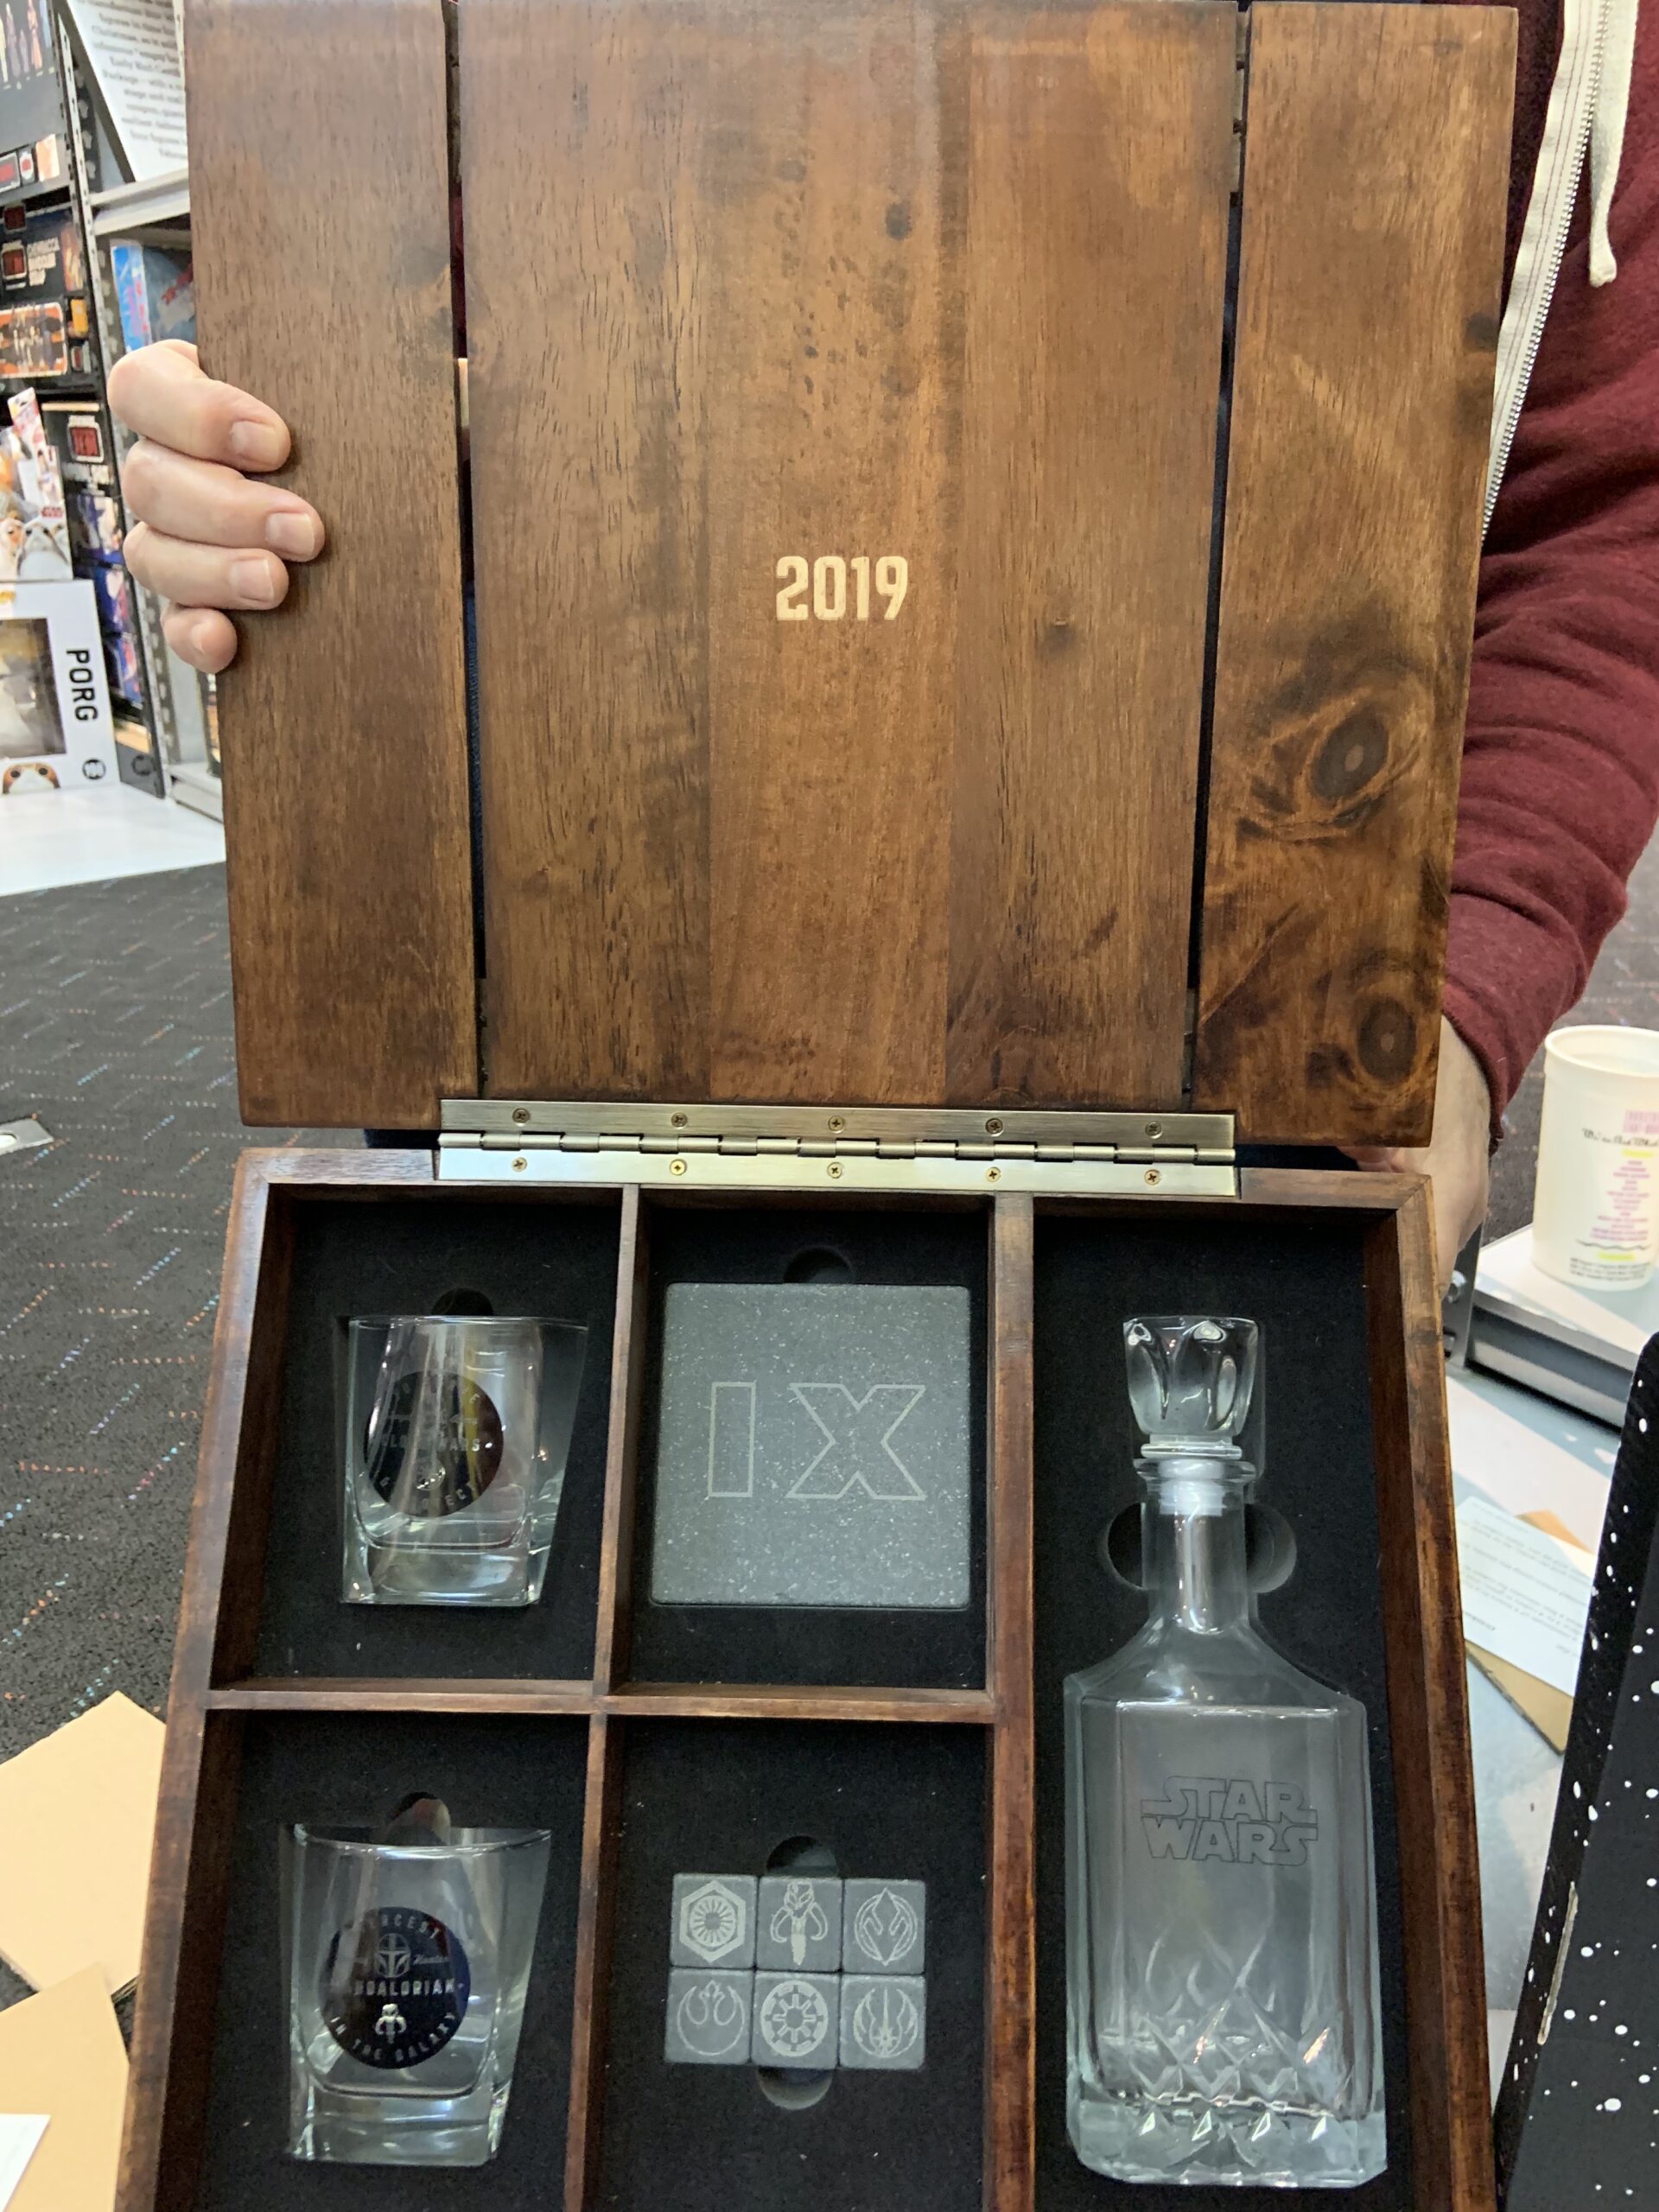 The 2019 Lucasfilm Crew Gift.